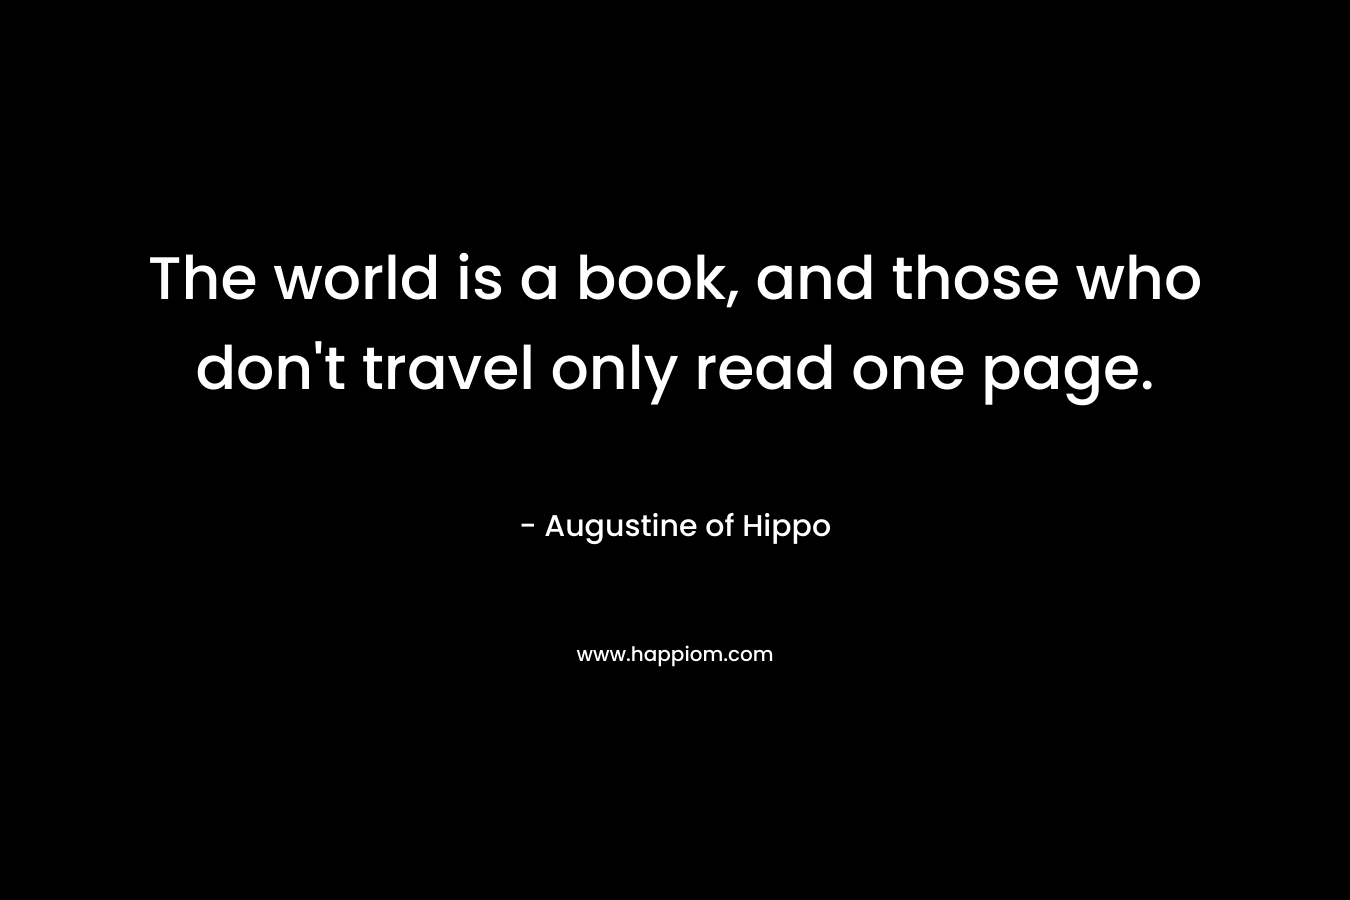 The world is a book, and those who don't travel only read one page.